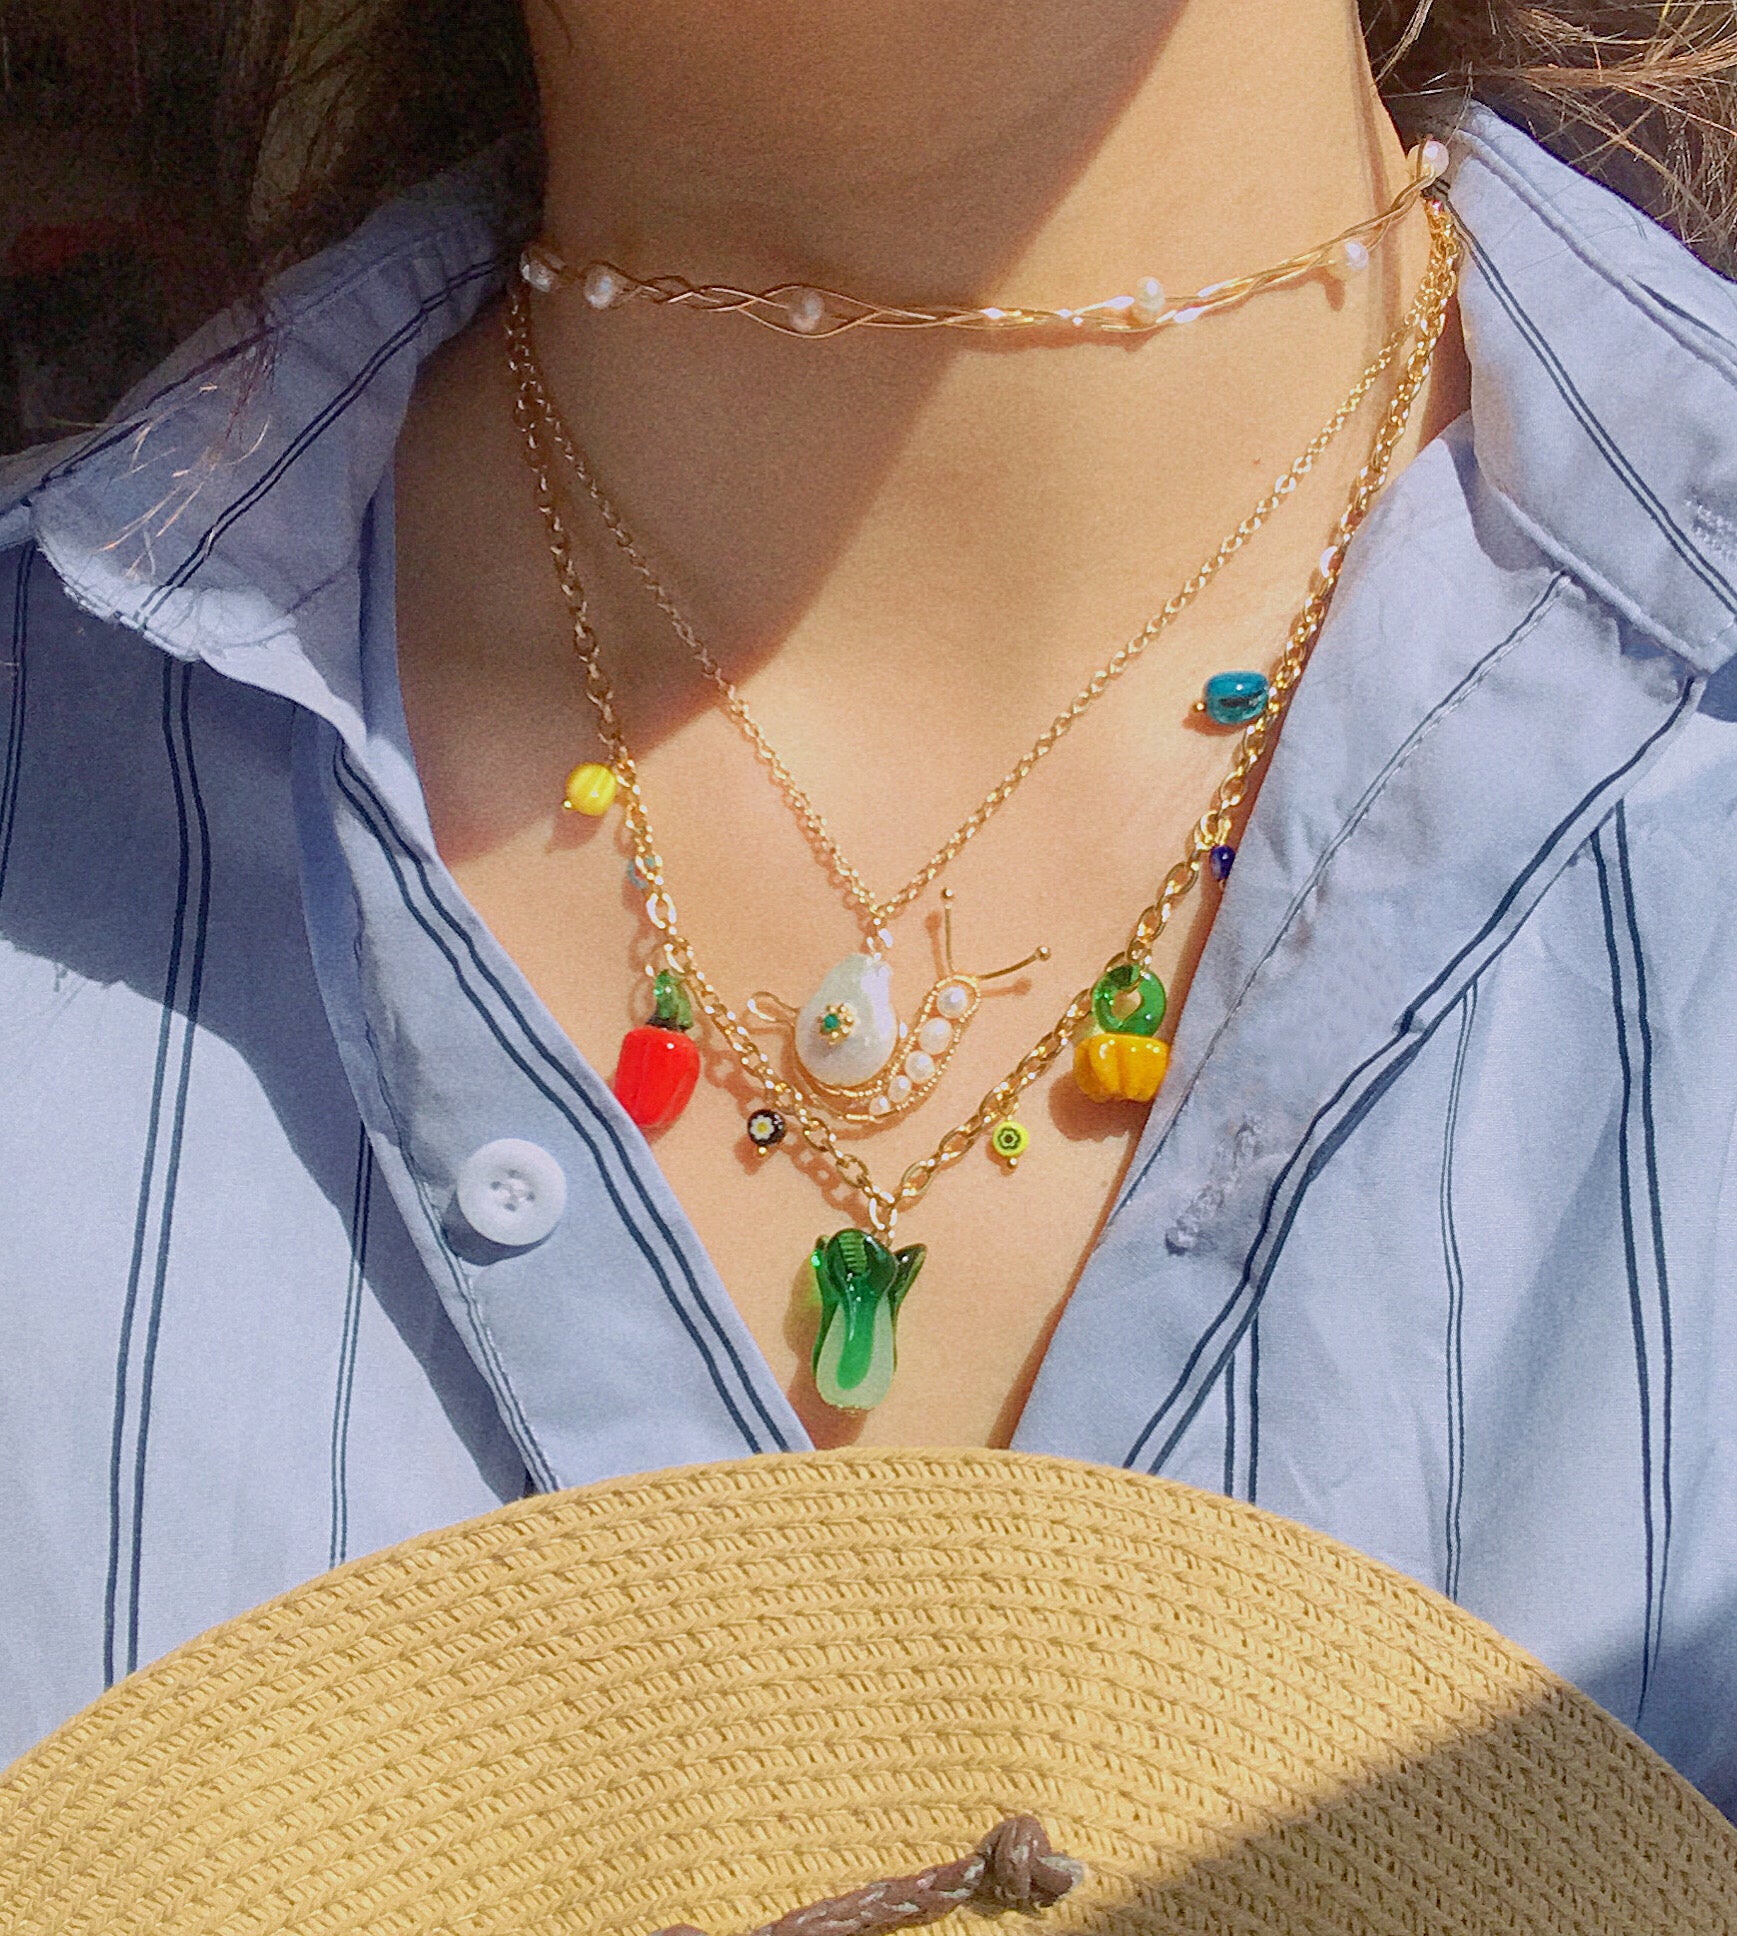 Garden Produce Necklace with Vegetable Charms